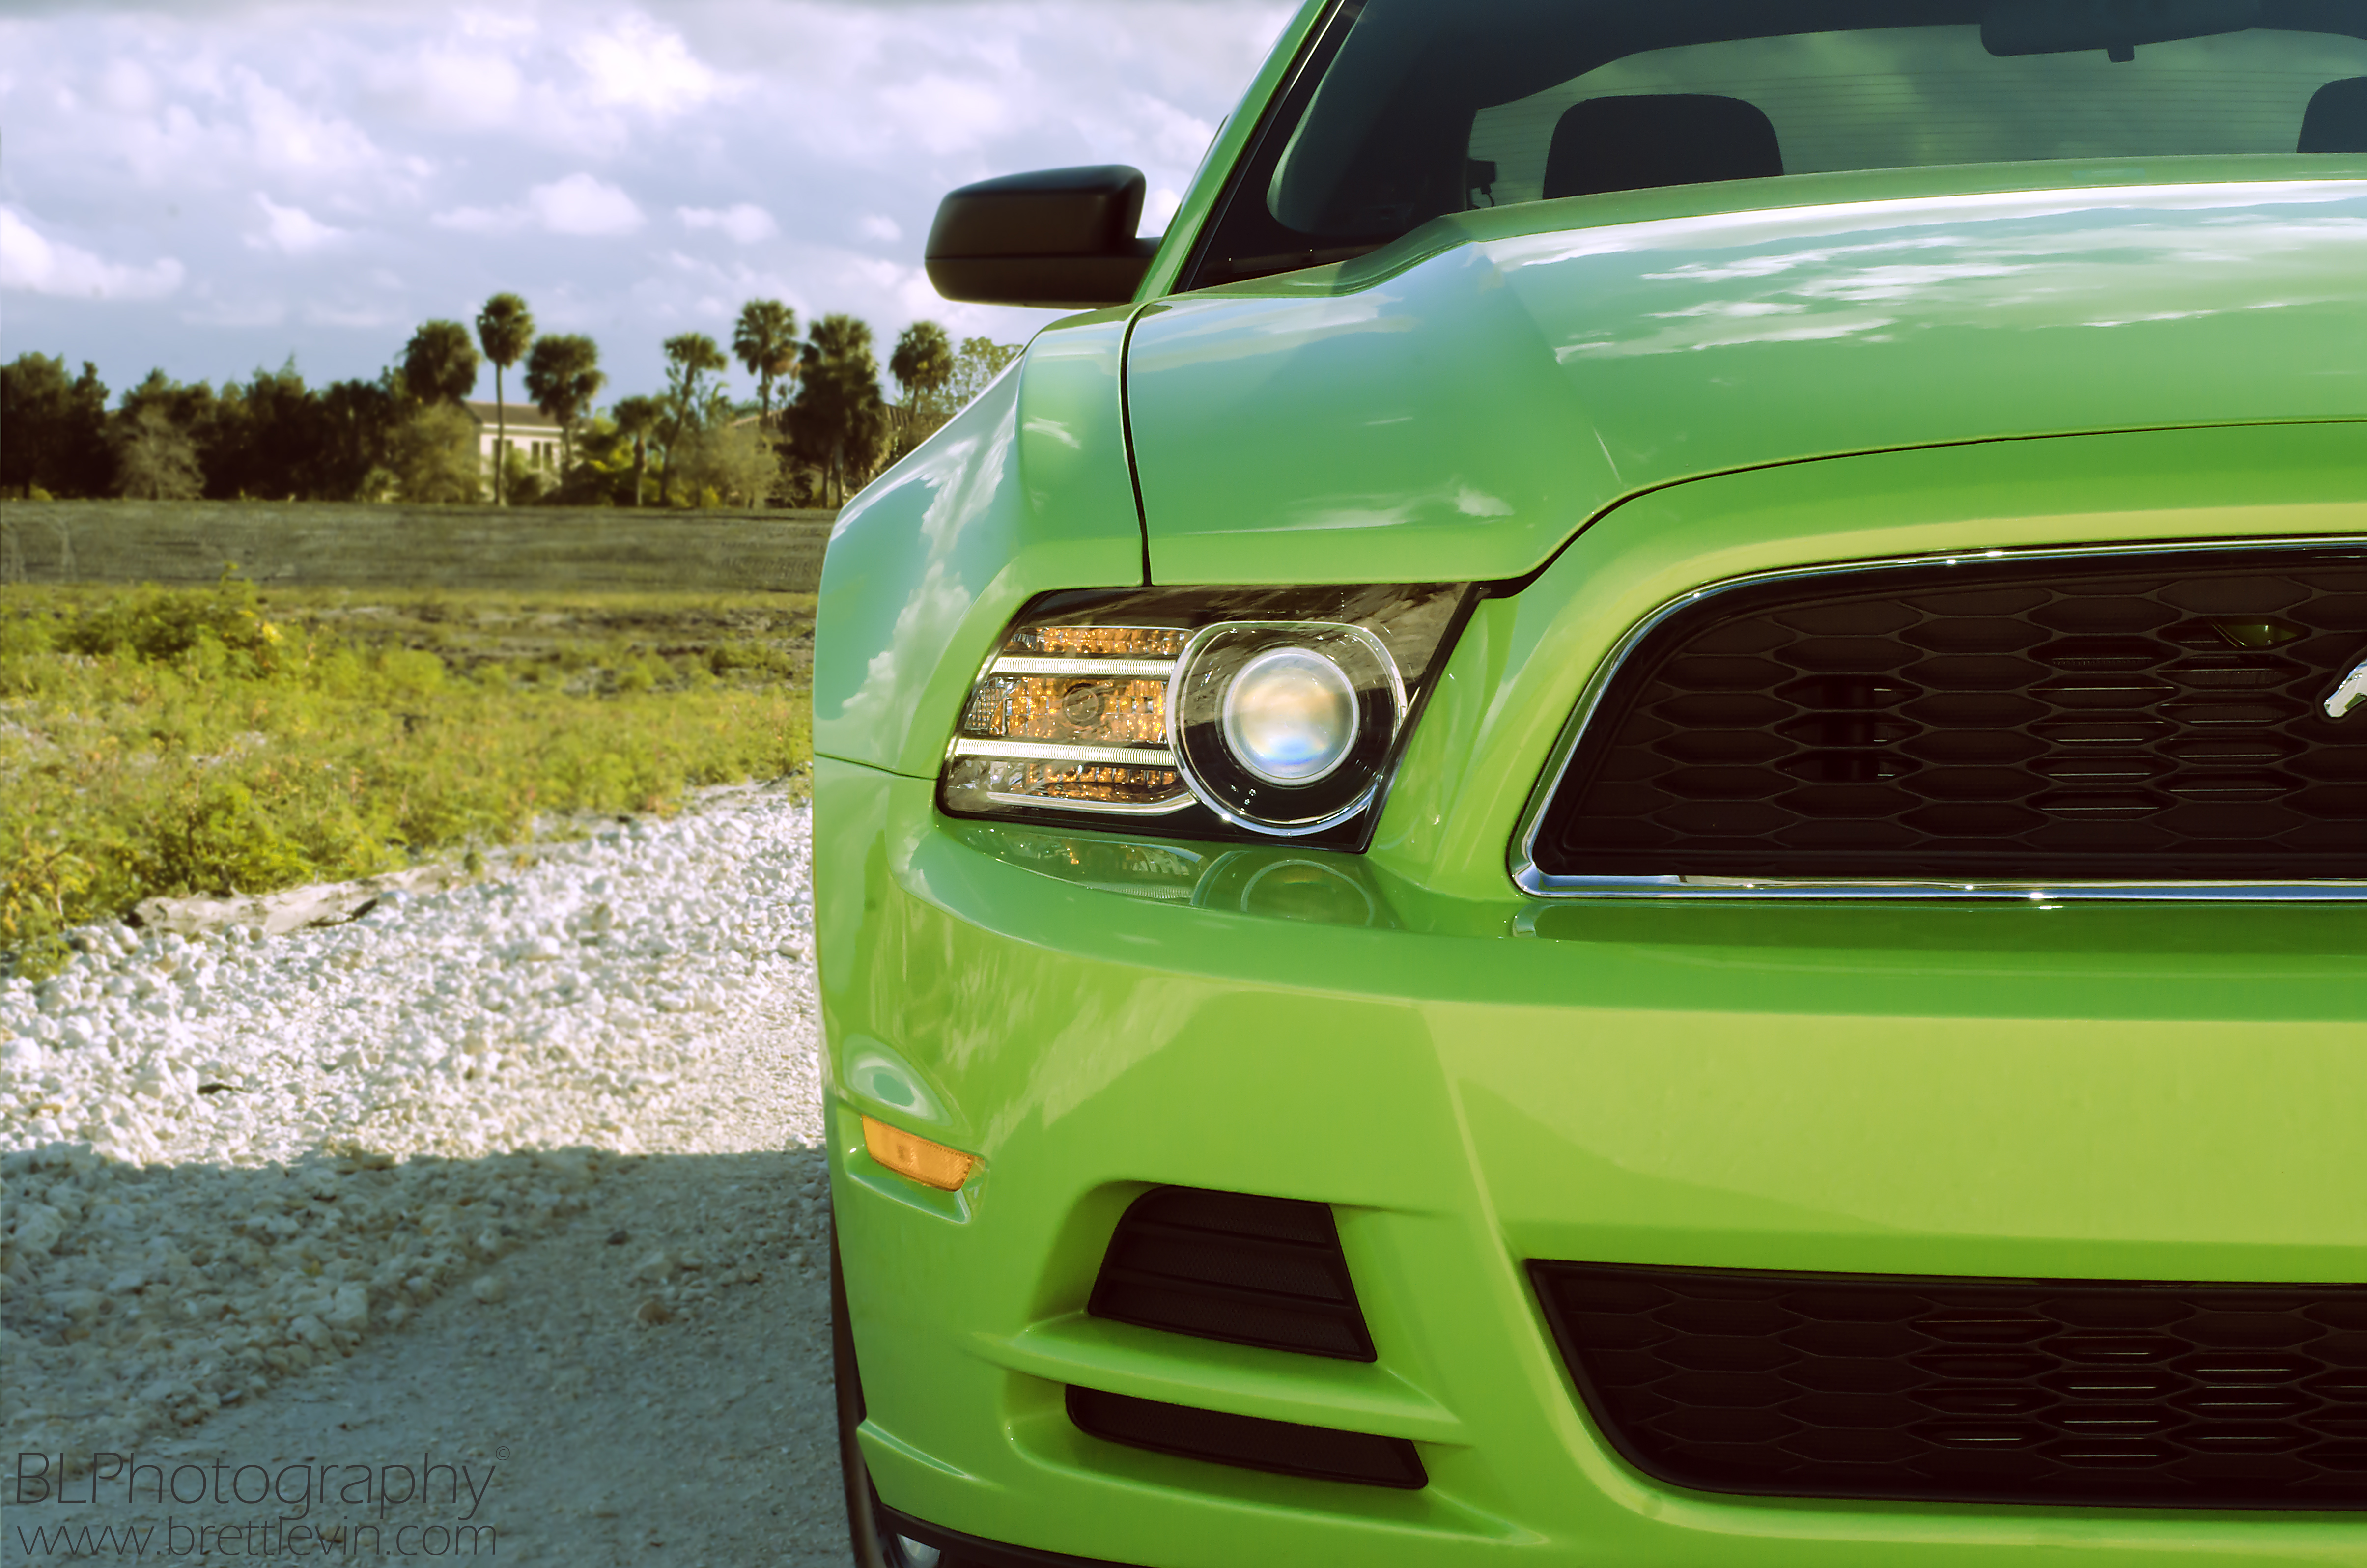 sports car, ford mustang, headlight, green, sports, cars, front view iphone wallpaper